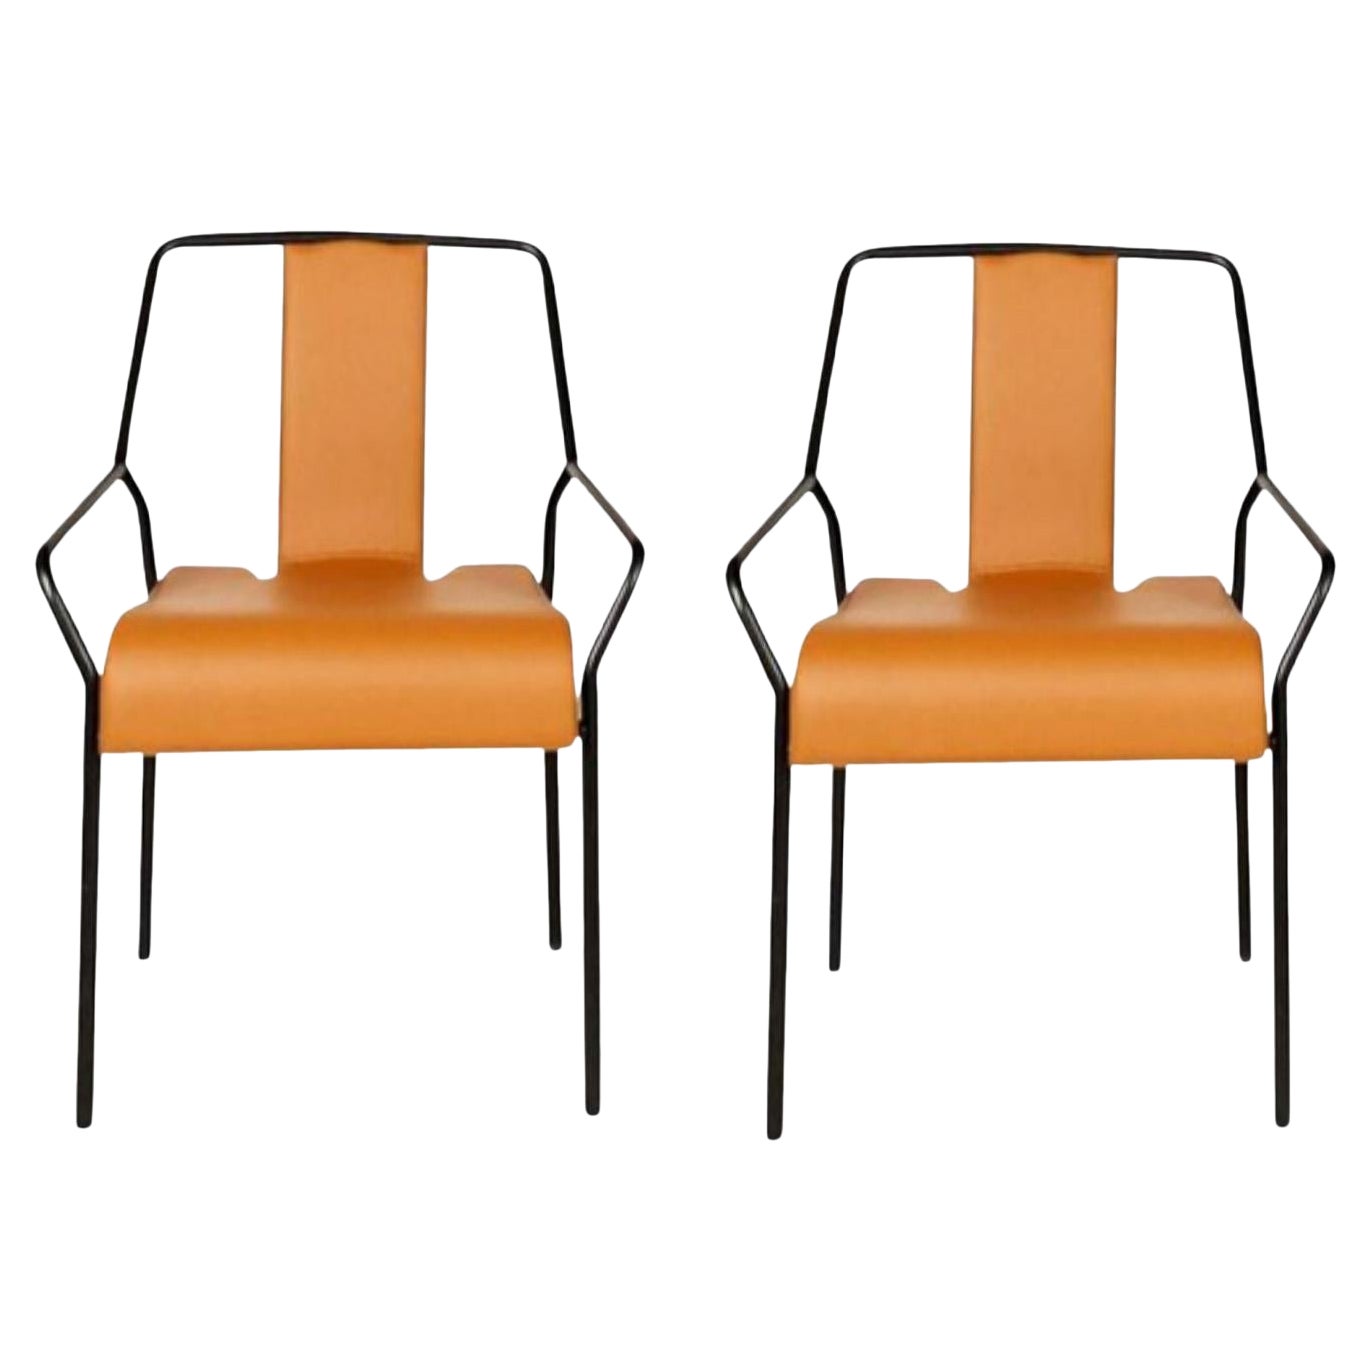 Set of 2 Upholstered Dao Chairs by Shin Azumi For Sale